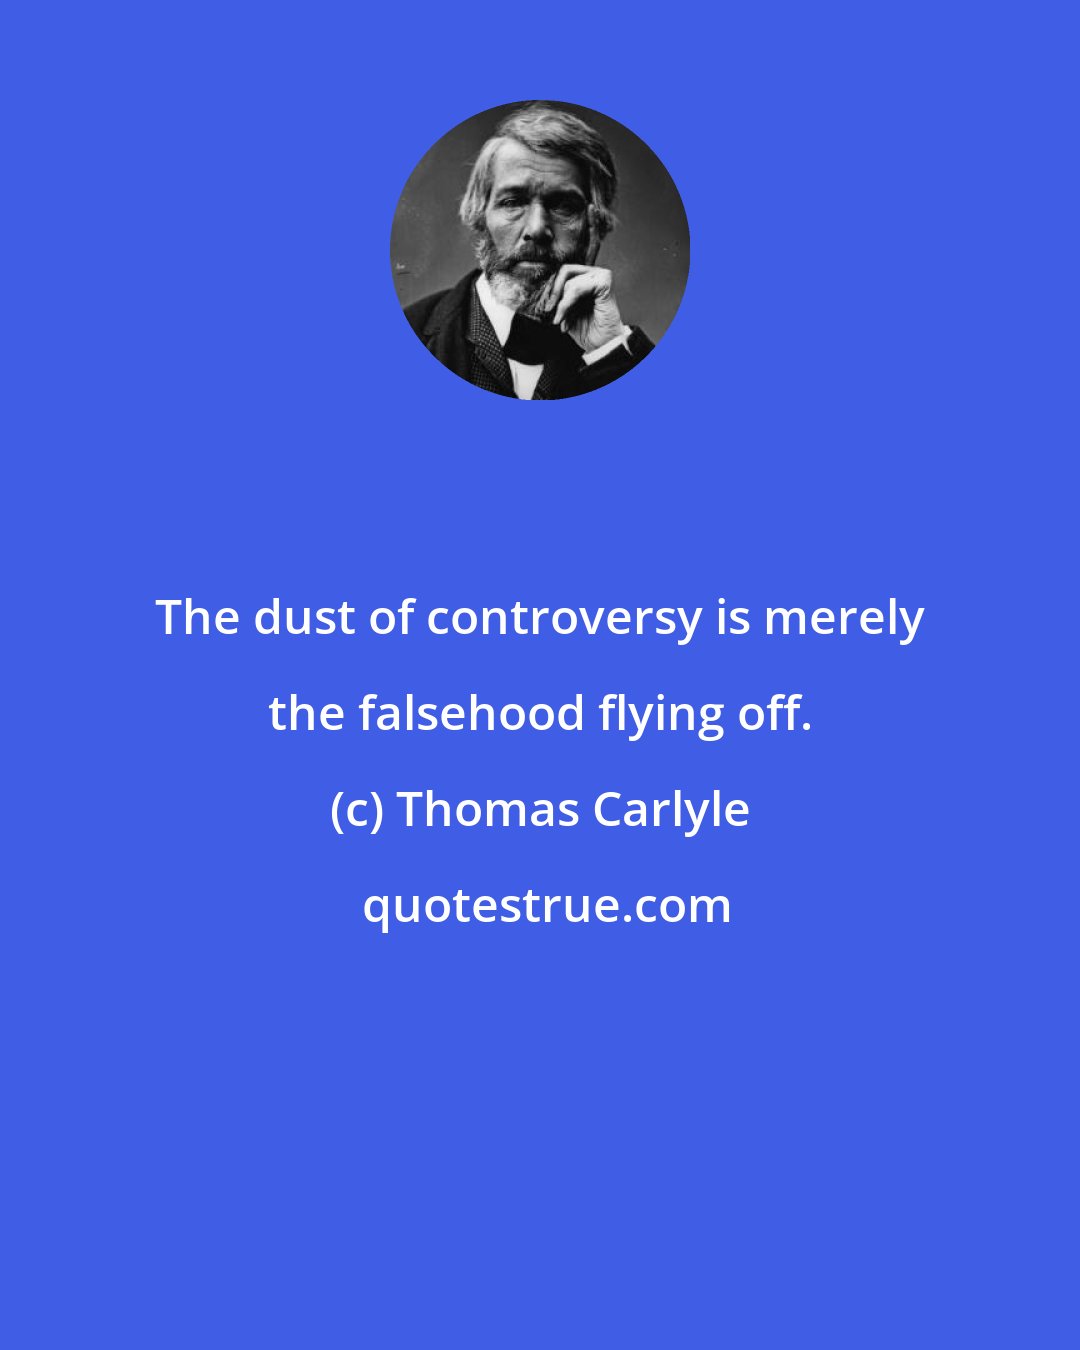 Thomas Carlyle: The dust of controversy is merely the falsehood flying off.